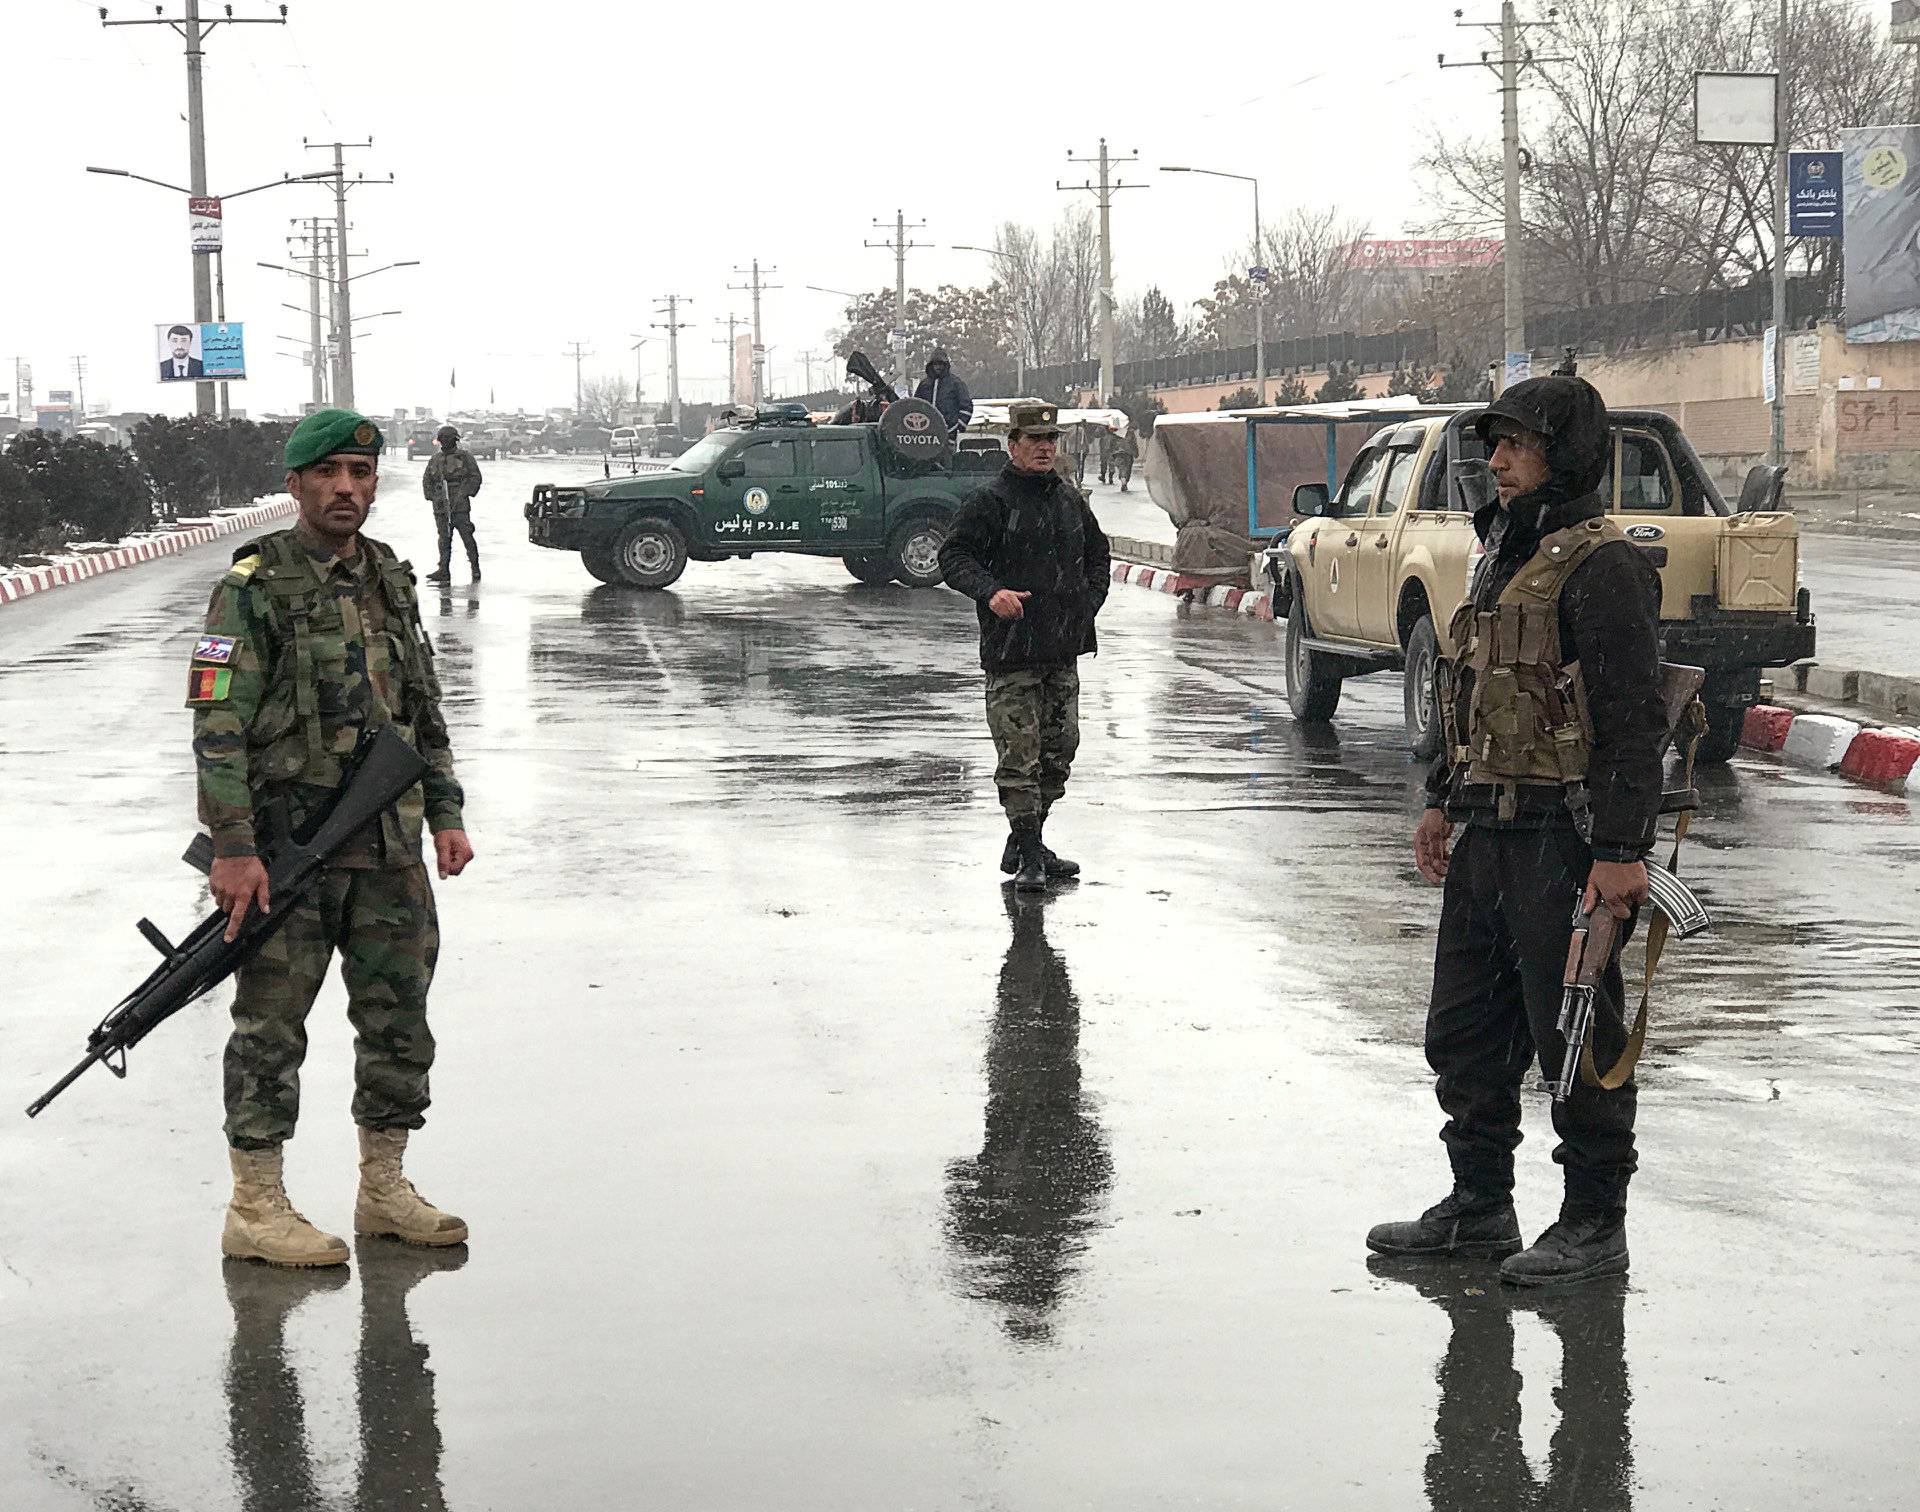 Afghan security forces stand near the Marshal Fahim military academy after a series of explosions in Kabul